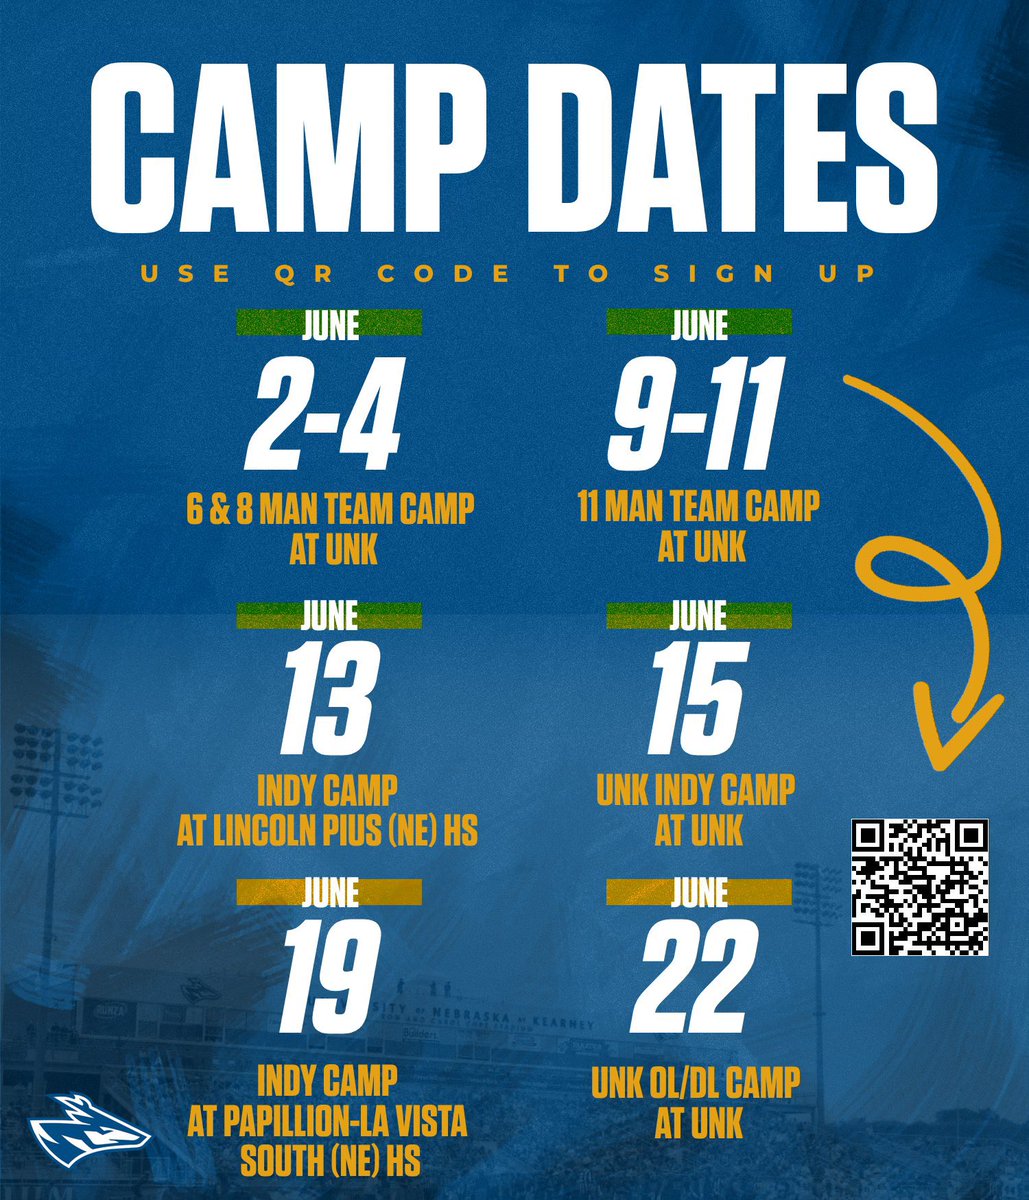 Lots of opportunities to get better this summer. Team Camps and Indy Camps. Camp with the Lopers 🤘🏼